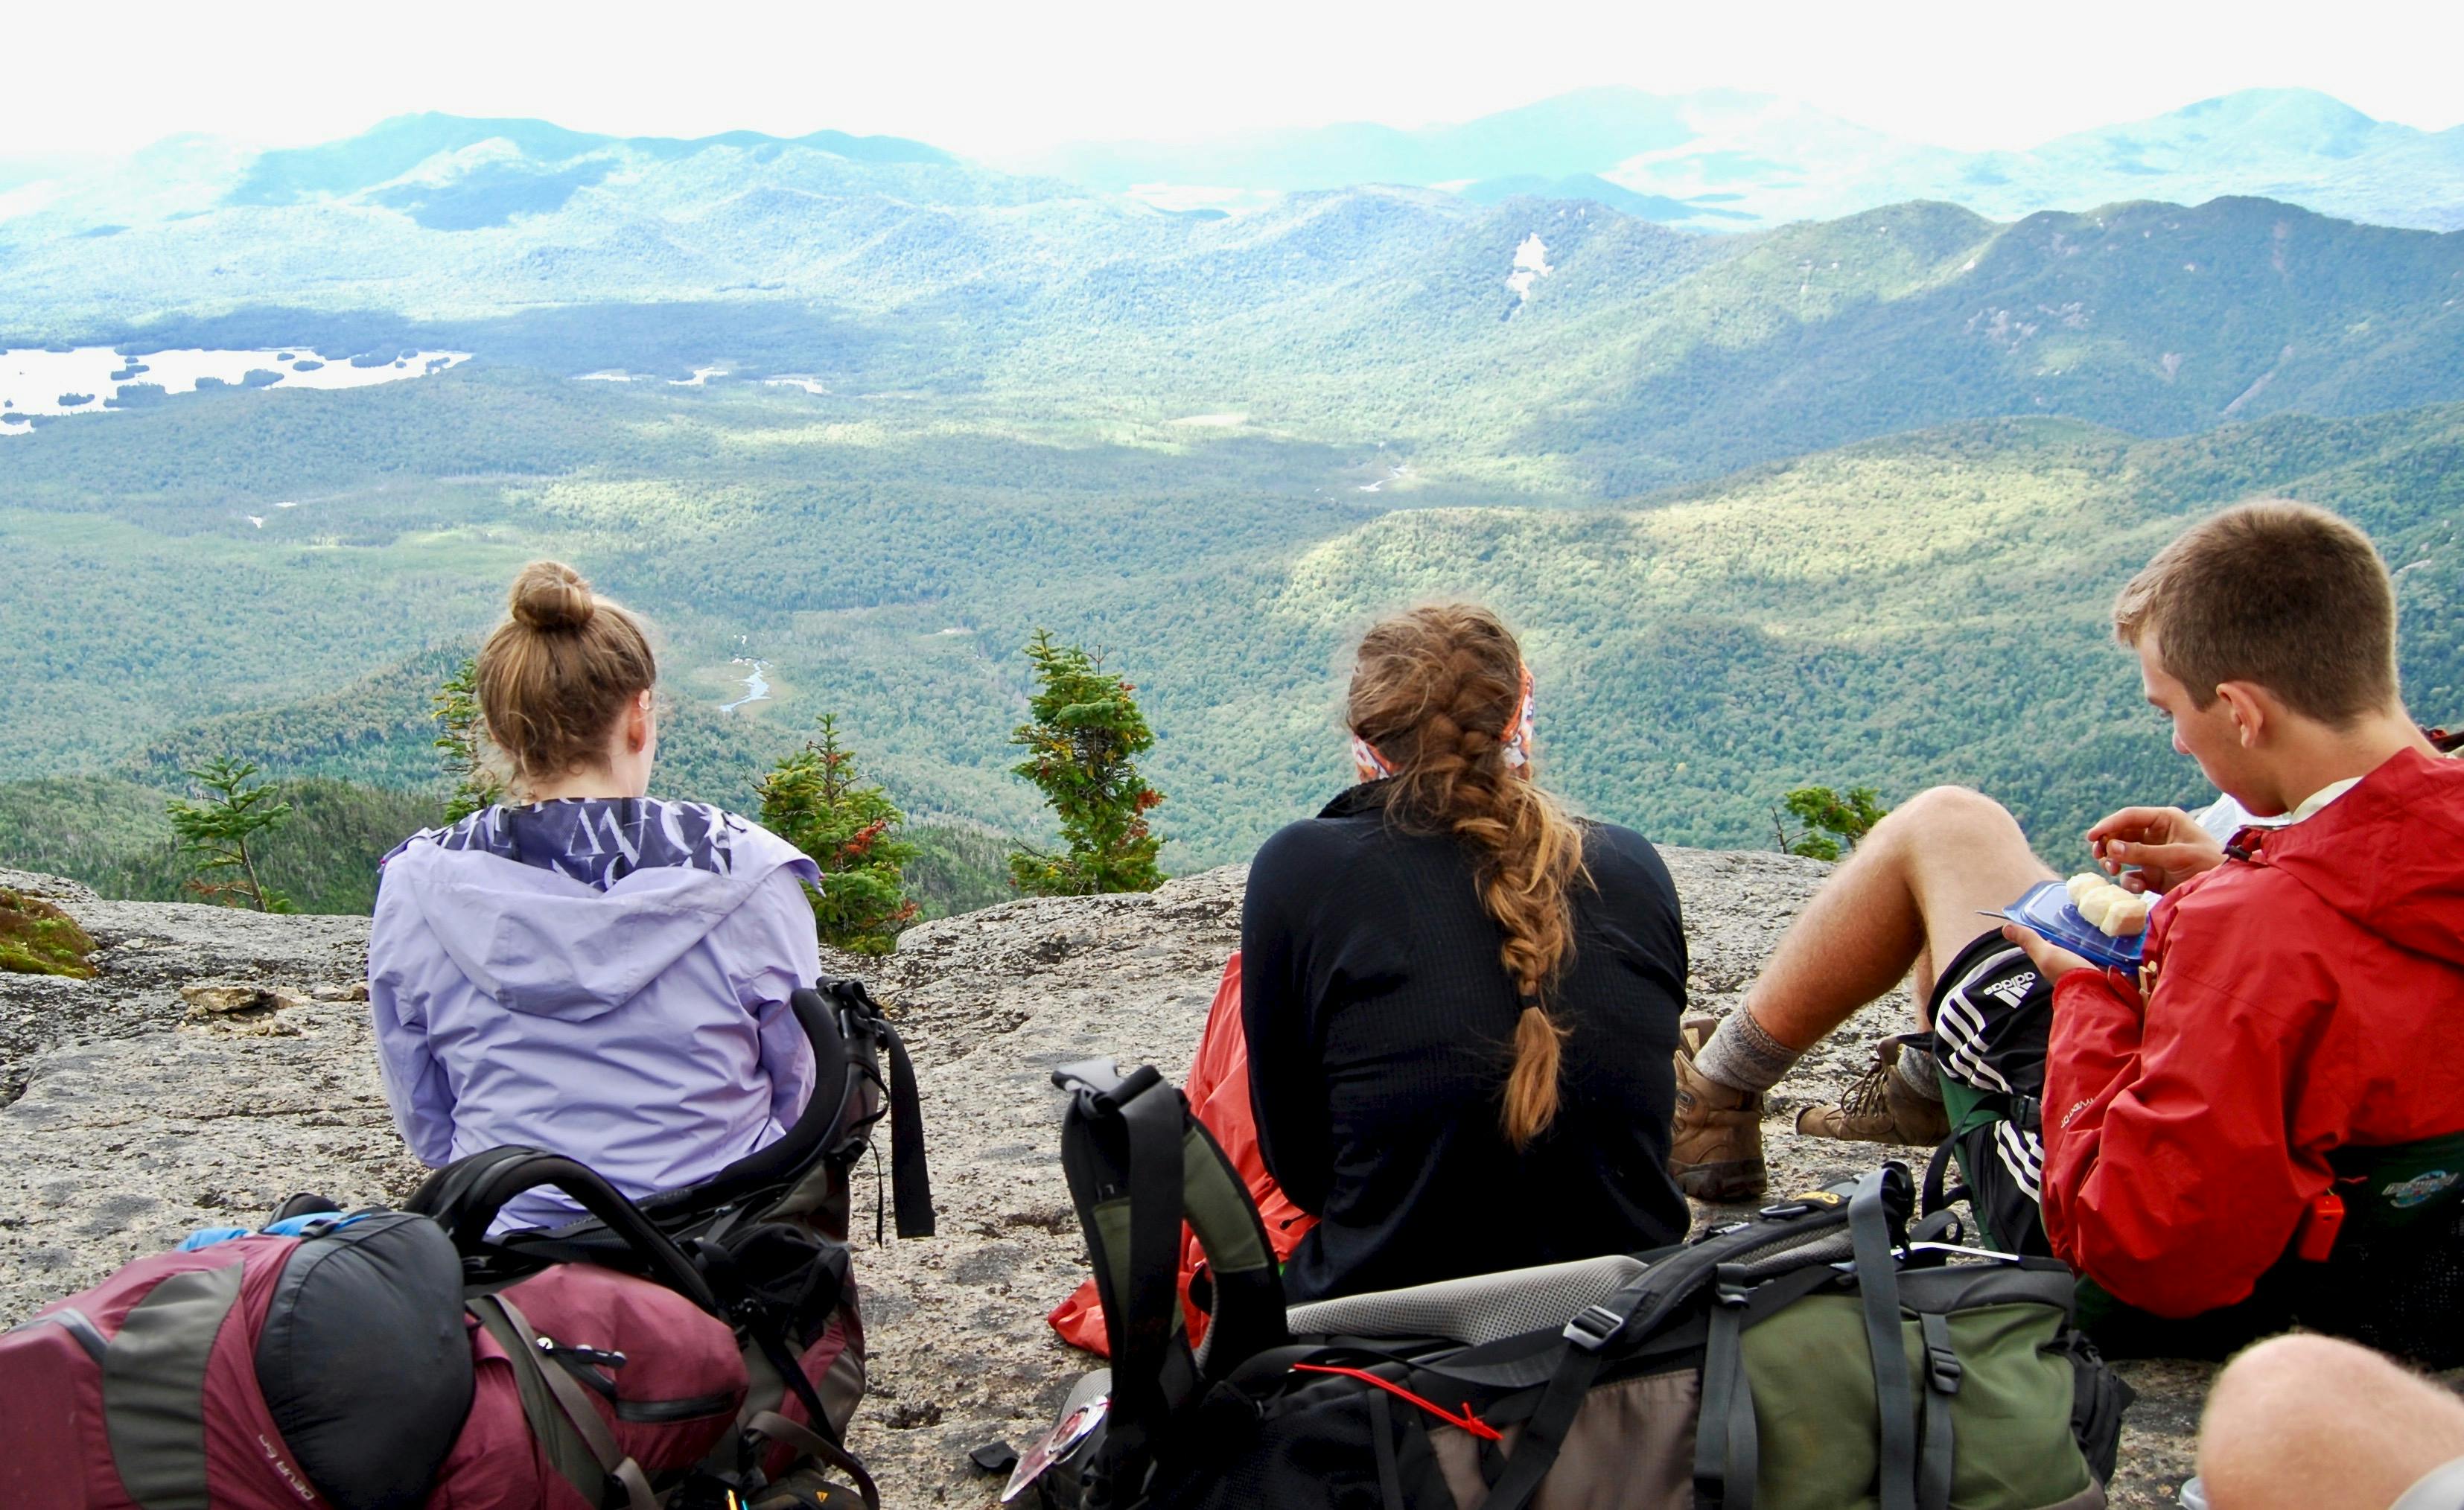 Two women and a man sit on a rock with their backpacks on the ground behind them